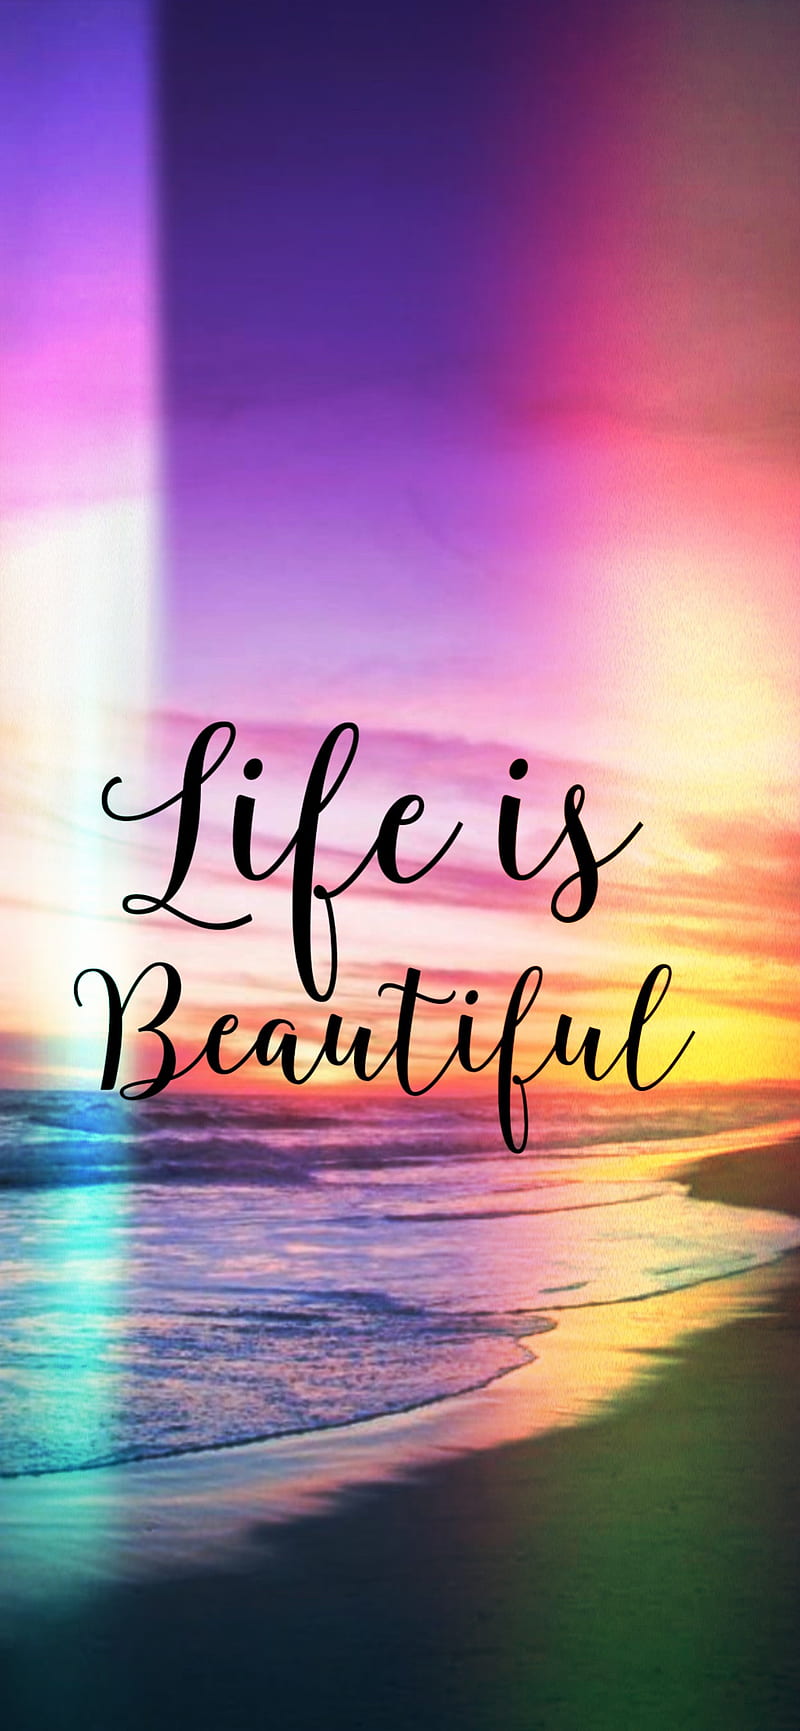 Life is Beautiful, beach, colorful, ocean, quote, quotes, sea, summer, HD phone wallpaper